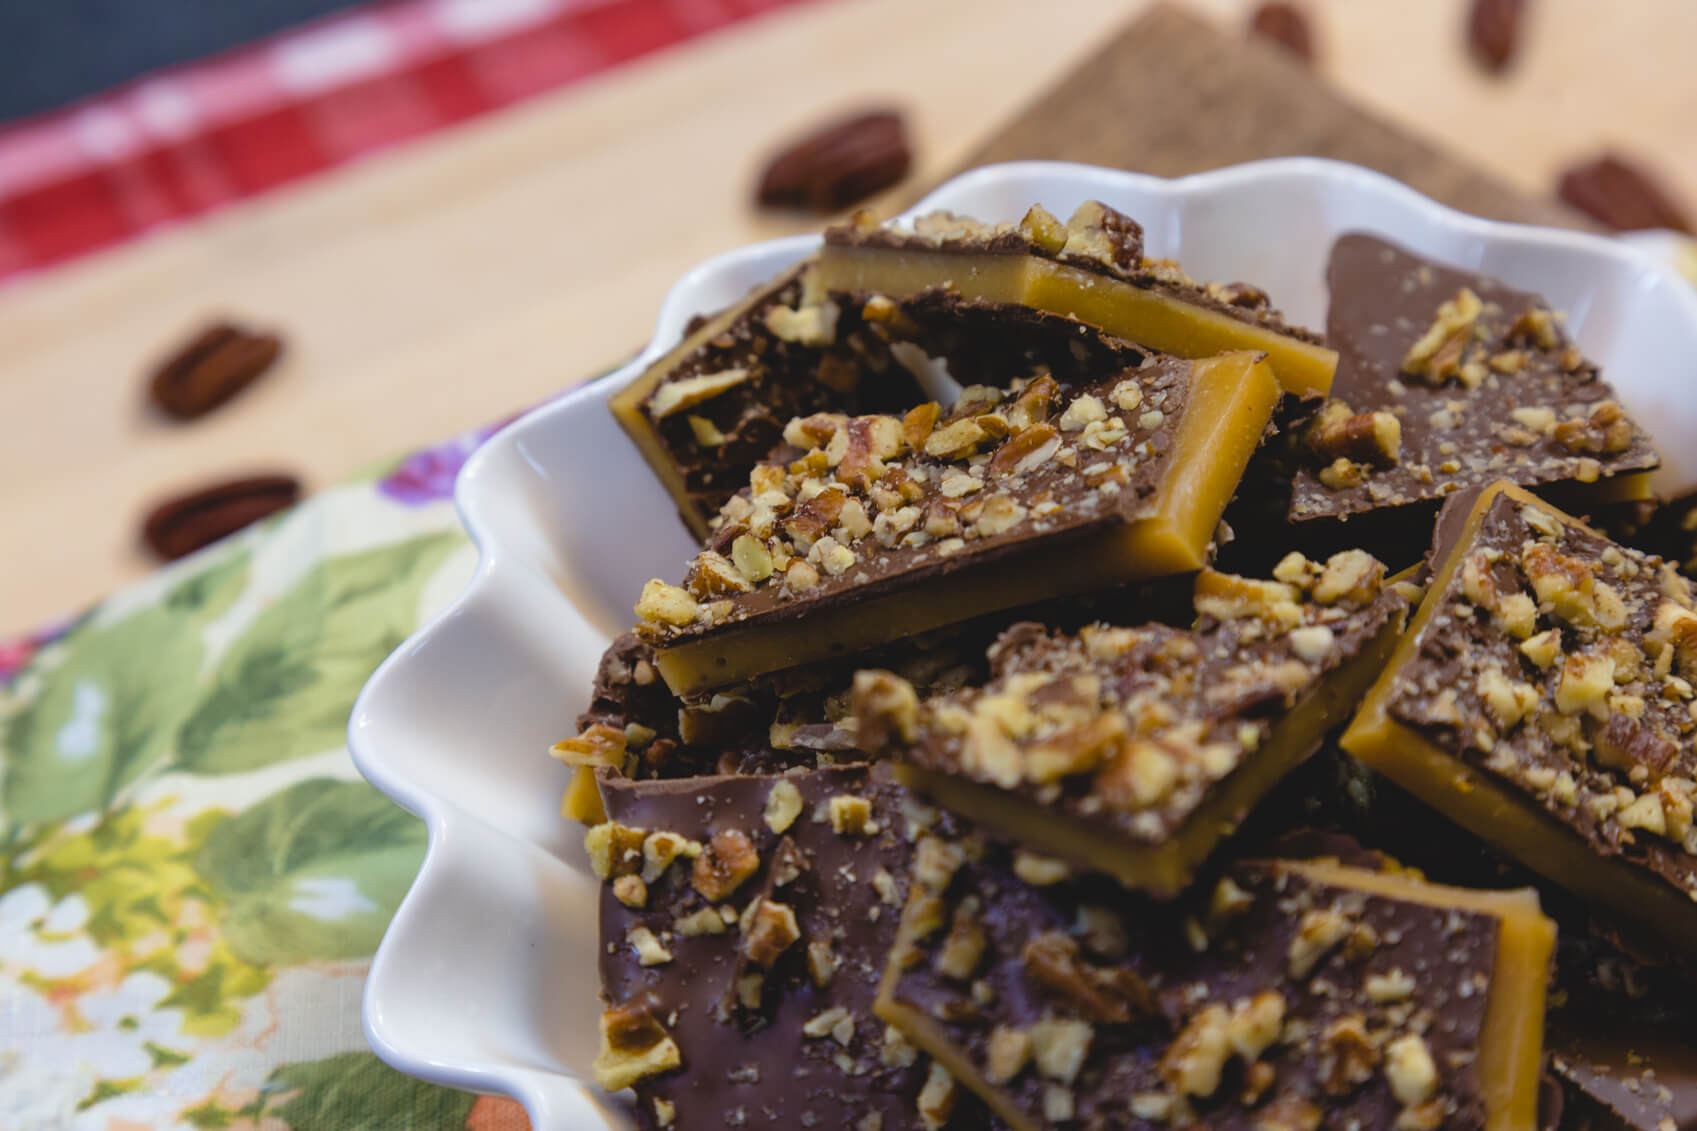 Chocolate and chopped pecans make a perfect topping.